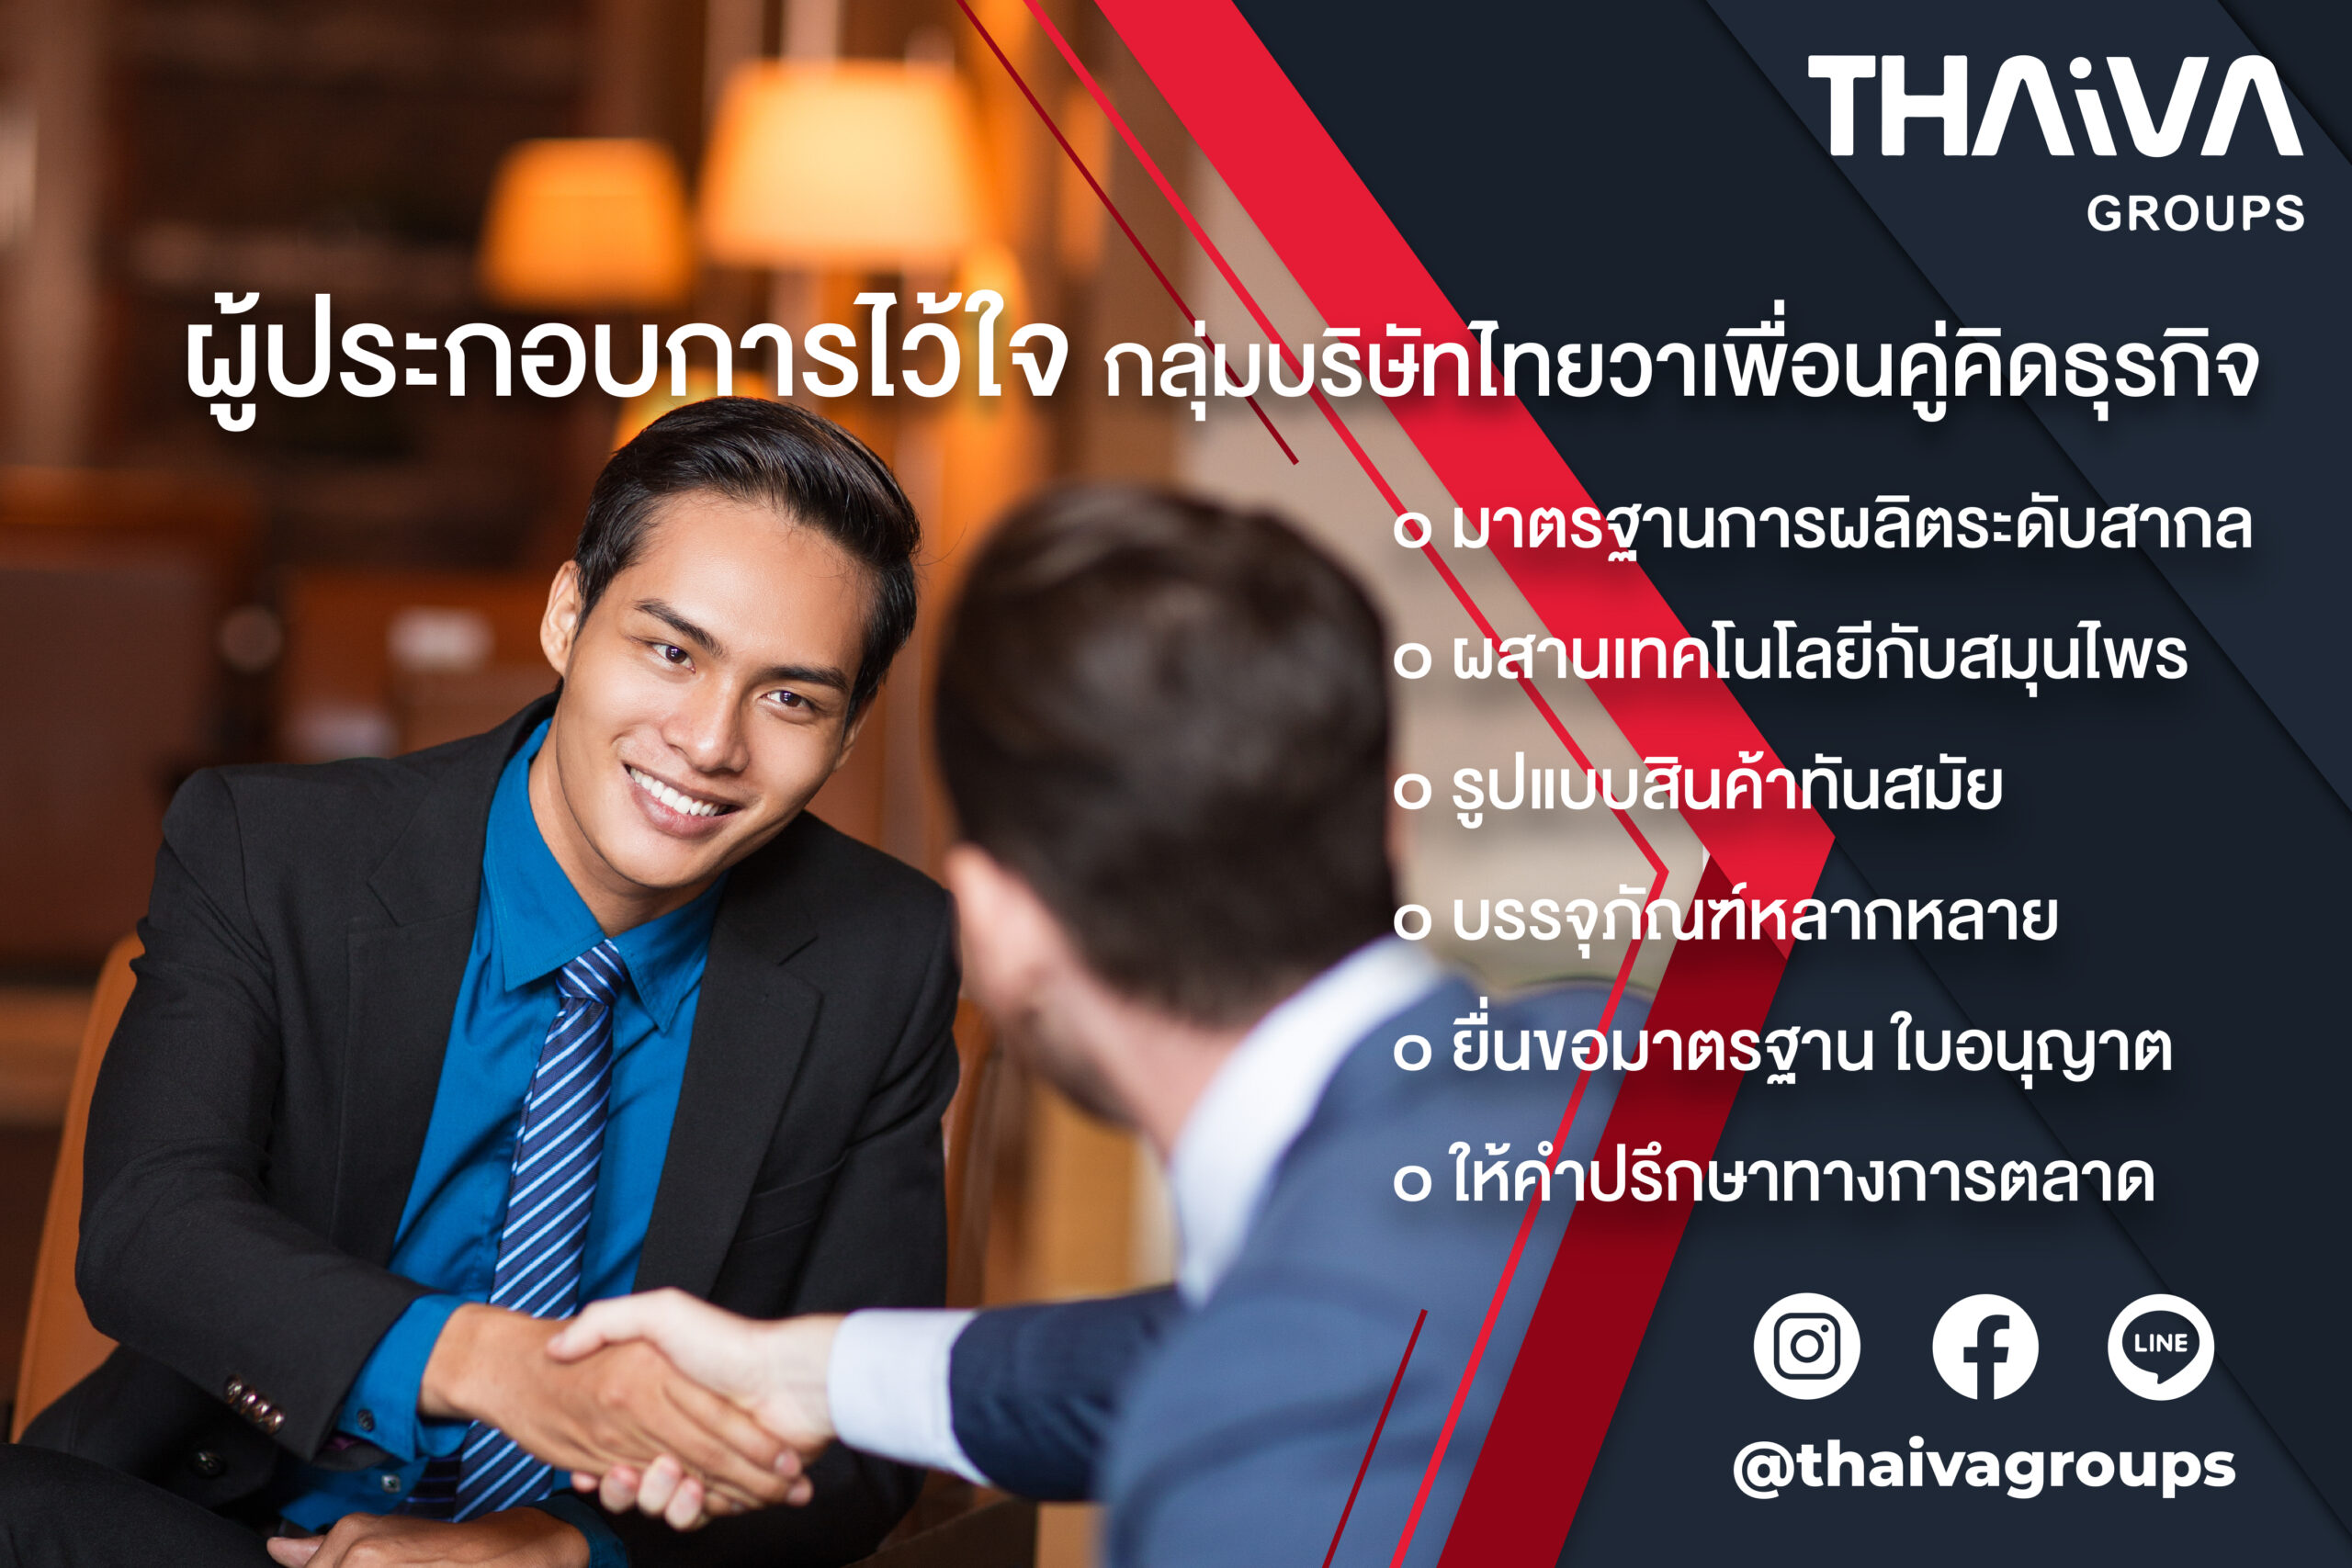 You are currently viewing Thaivagroups, a Trusted business partner